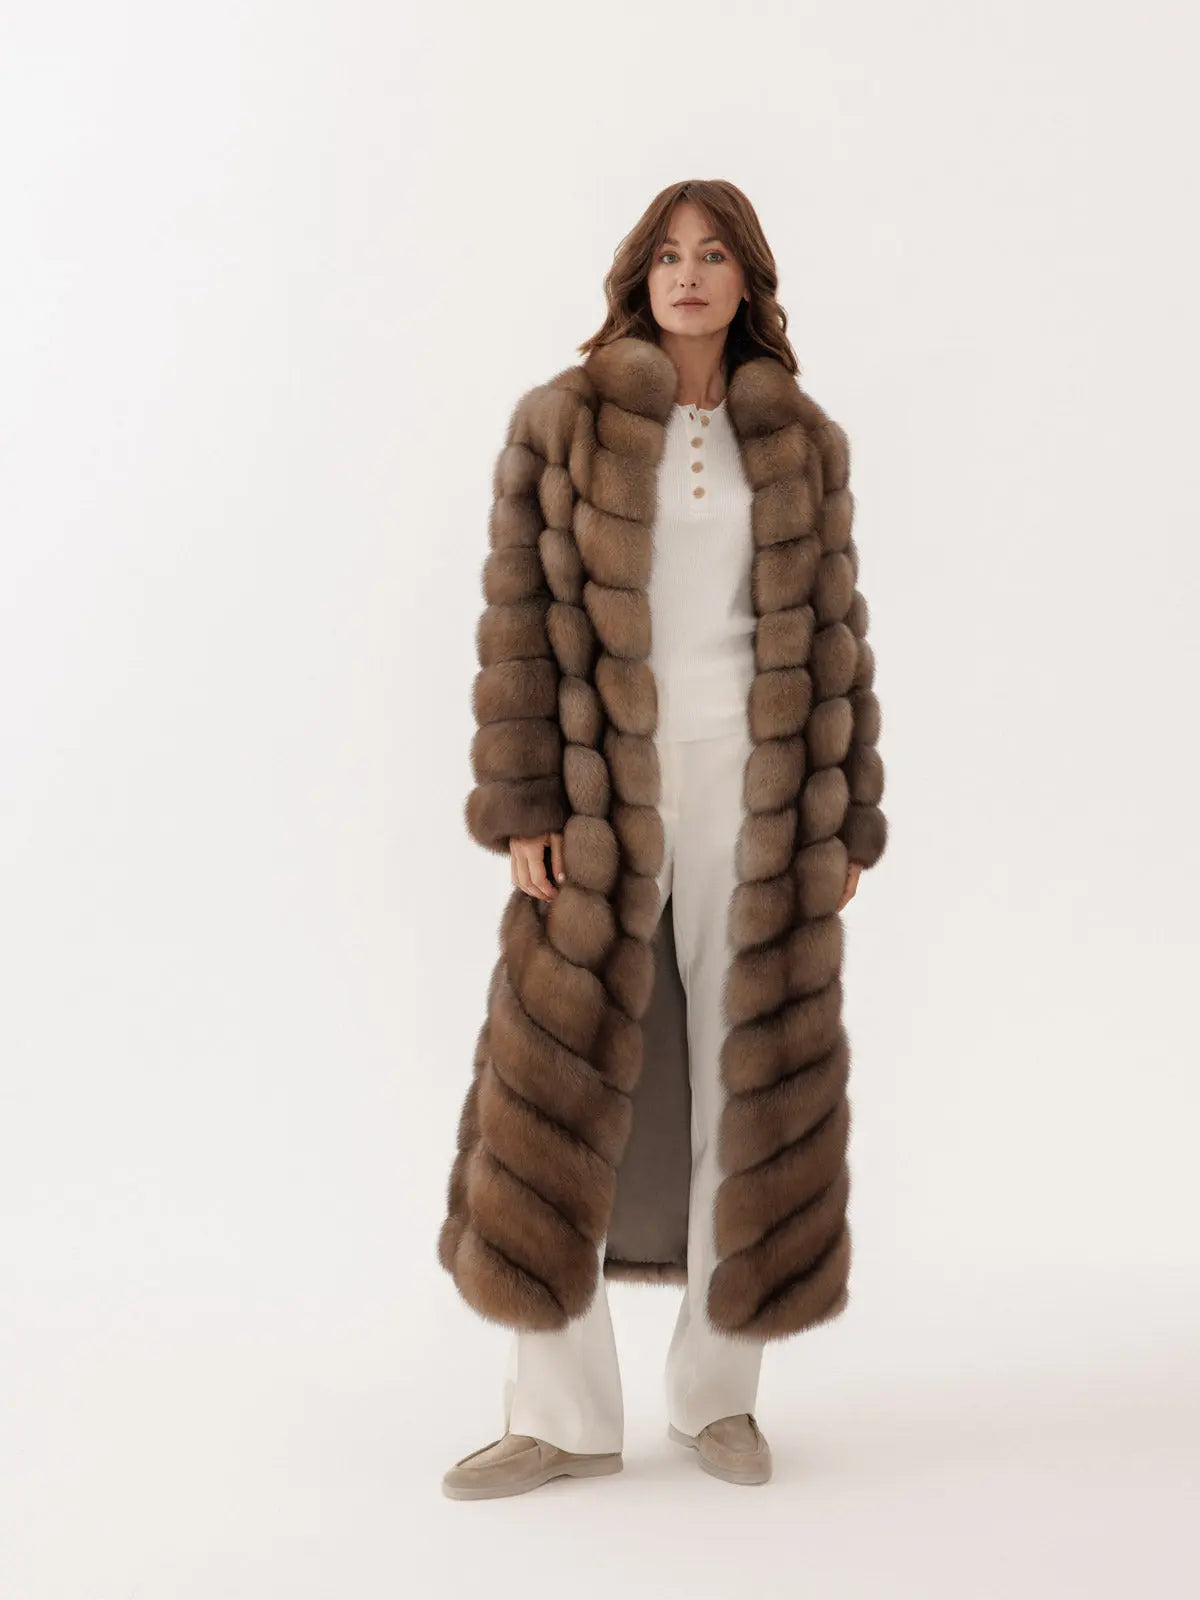 Marten coat with stand up collar